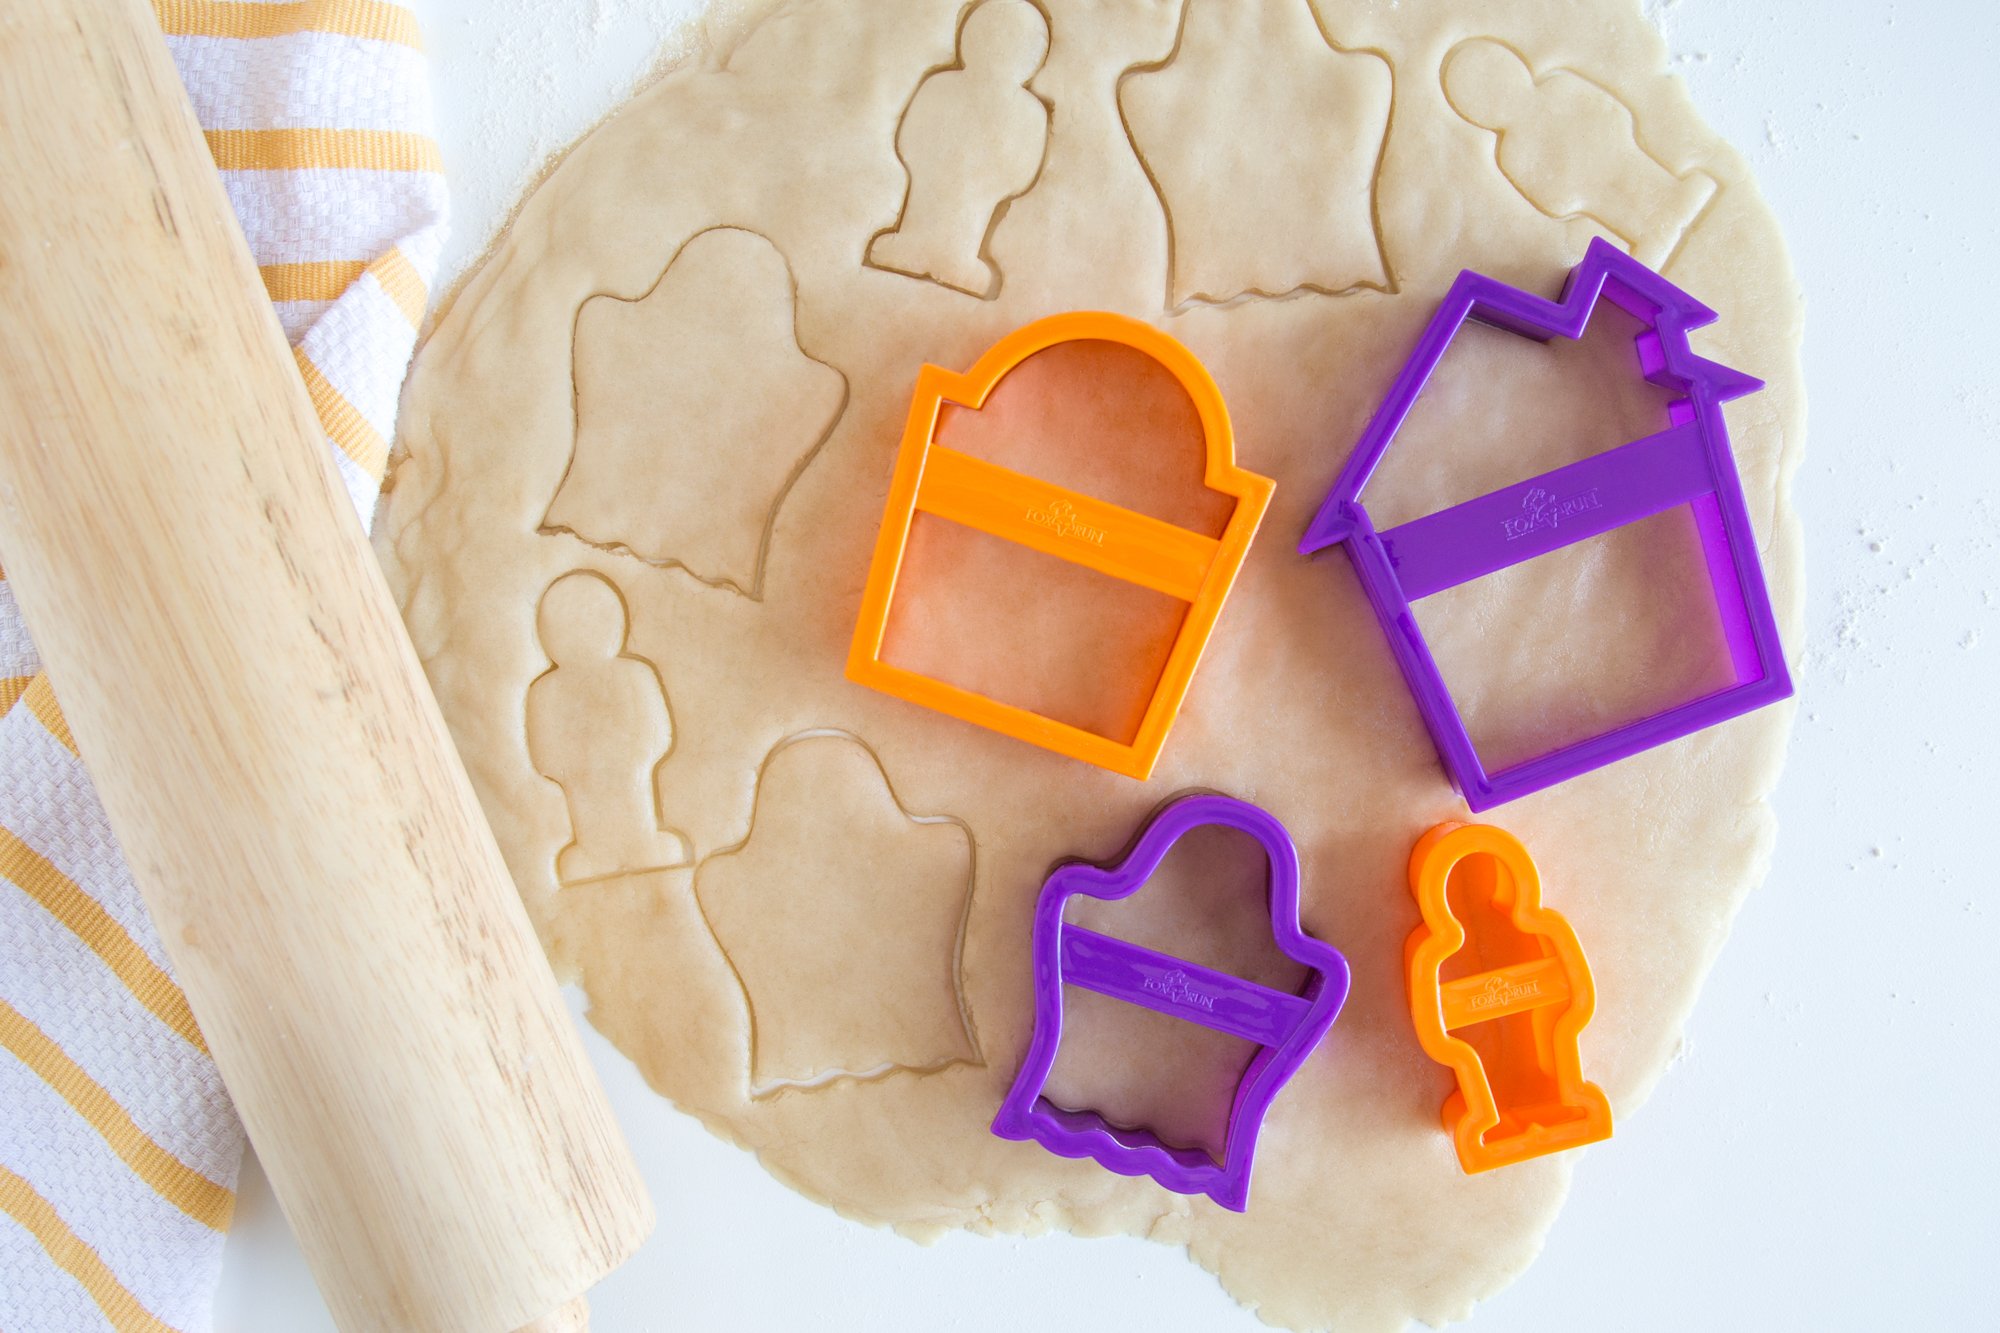 Fox Run 3668 Nesting Halloween Cookie Cutters, 1.5 x 4.5 x 7.5 inches, Multicolored